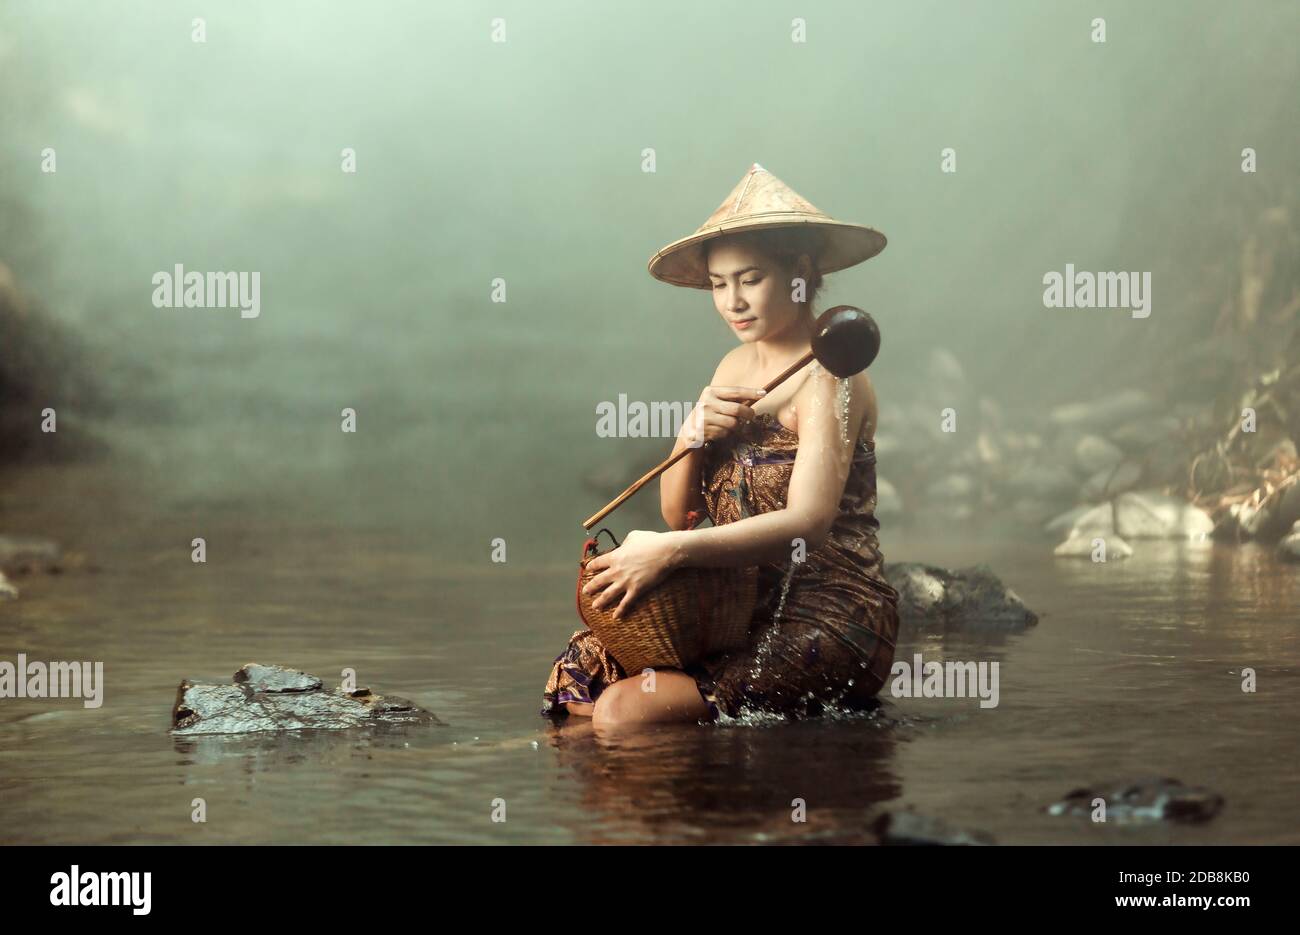 Woman sitting in a river bathing, Thailand Stock Photo